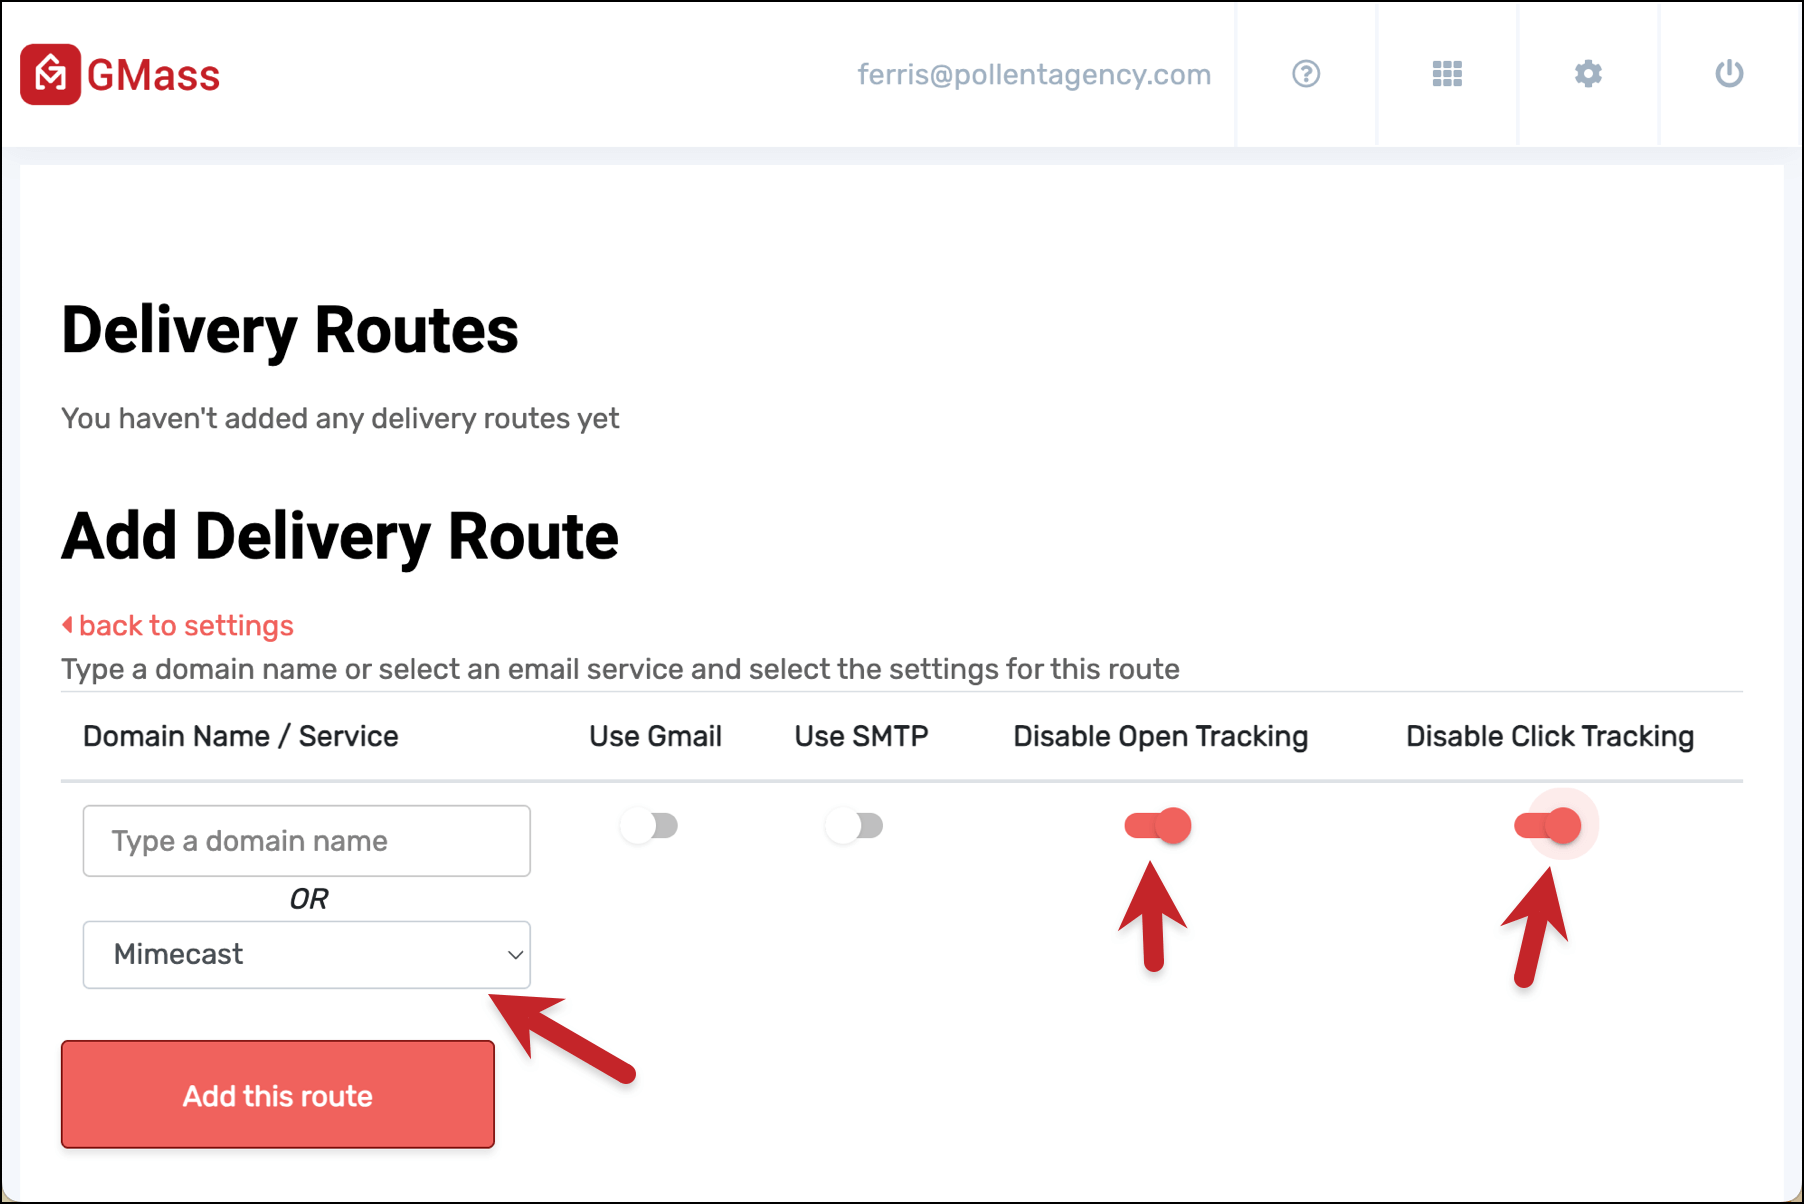 Adding Mimecast's delivery route